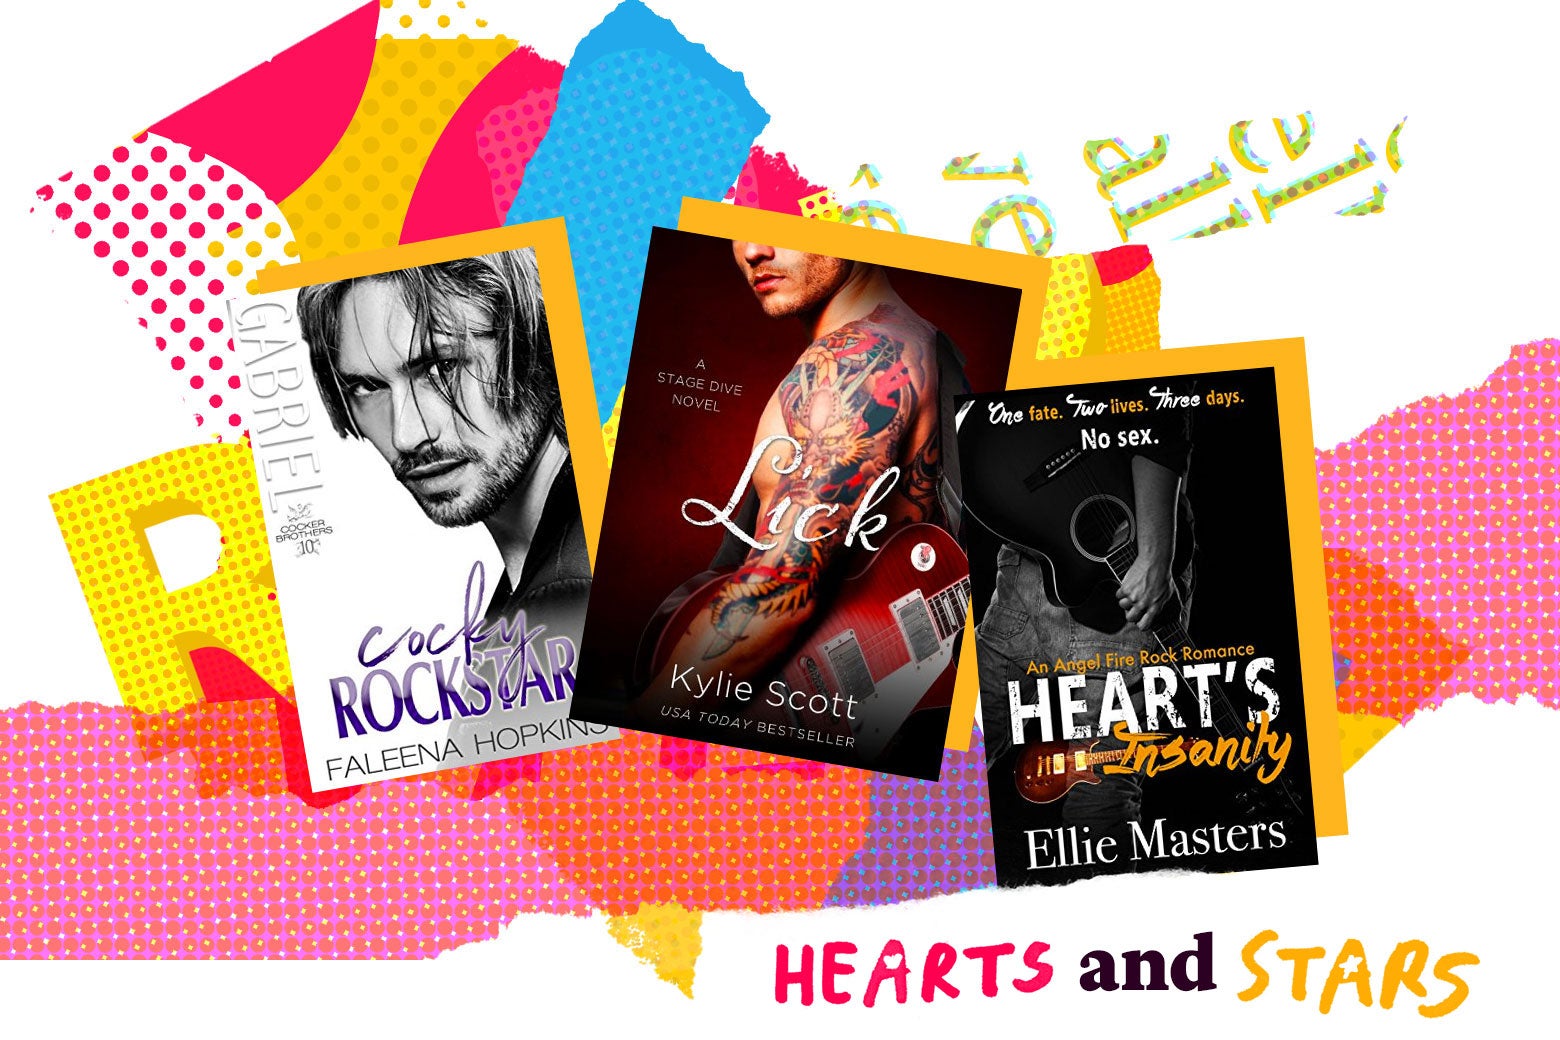 Photo illustration: a collection of romance novel covers, including Cocky Rockstar, Lick, and Heart's Insanity.